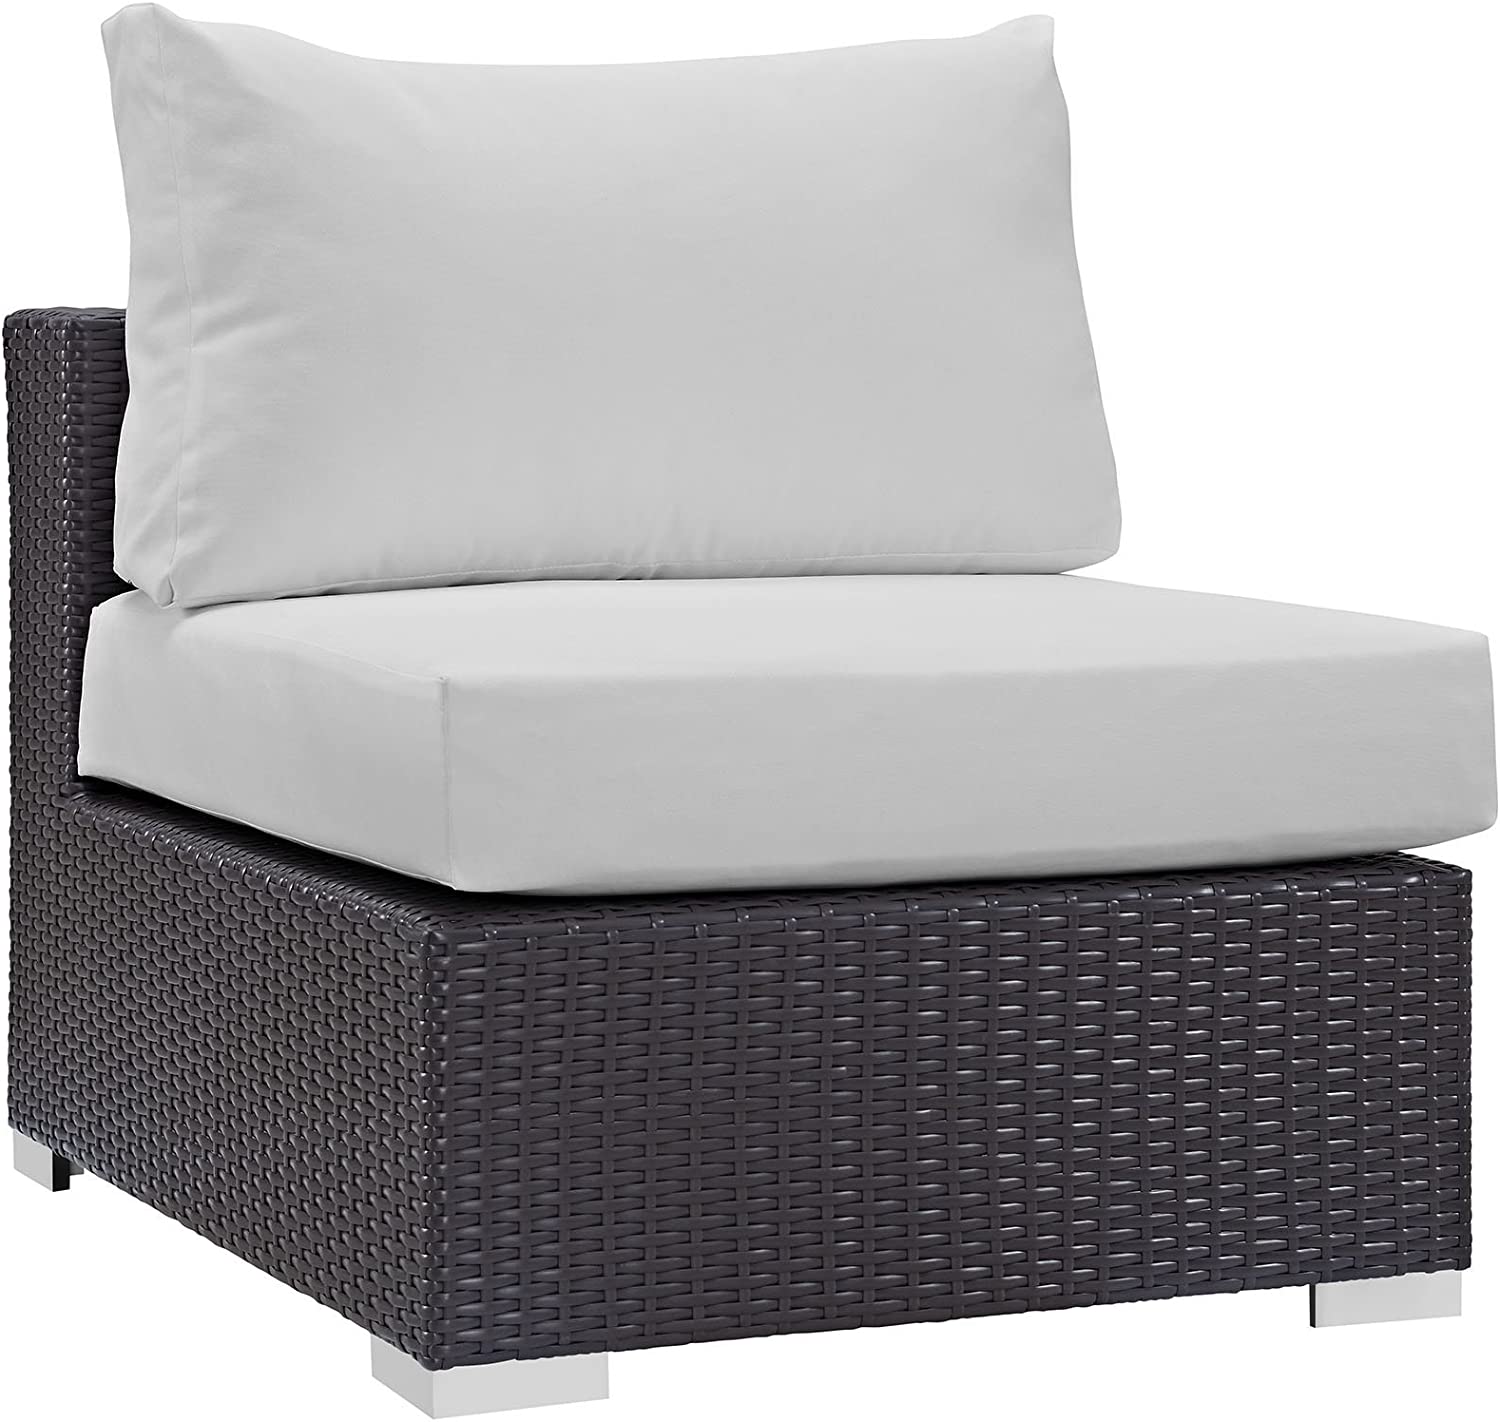 Modway Convene Wicker Rattan Outdoor Patio Sectional Sofa Armless Chair in Espresso White